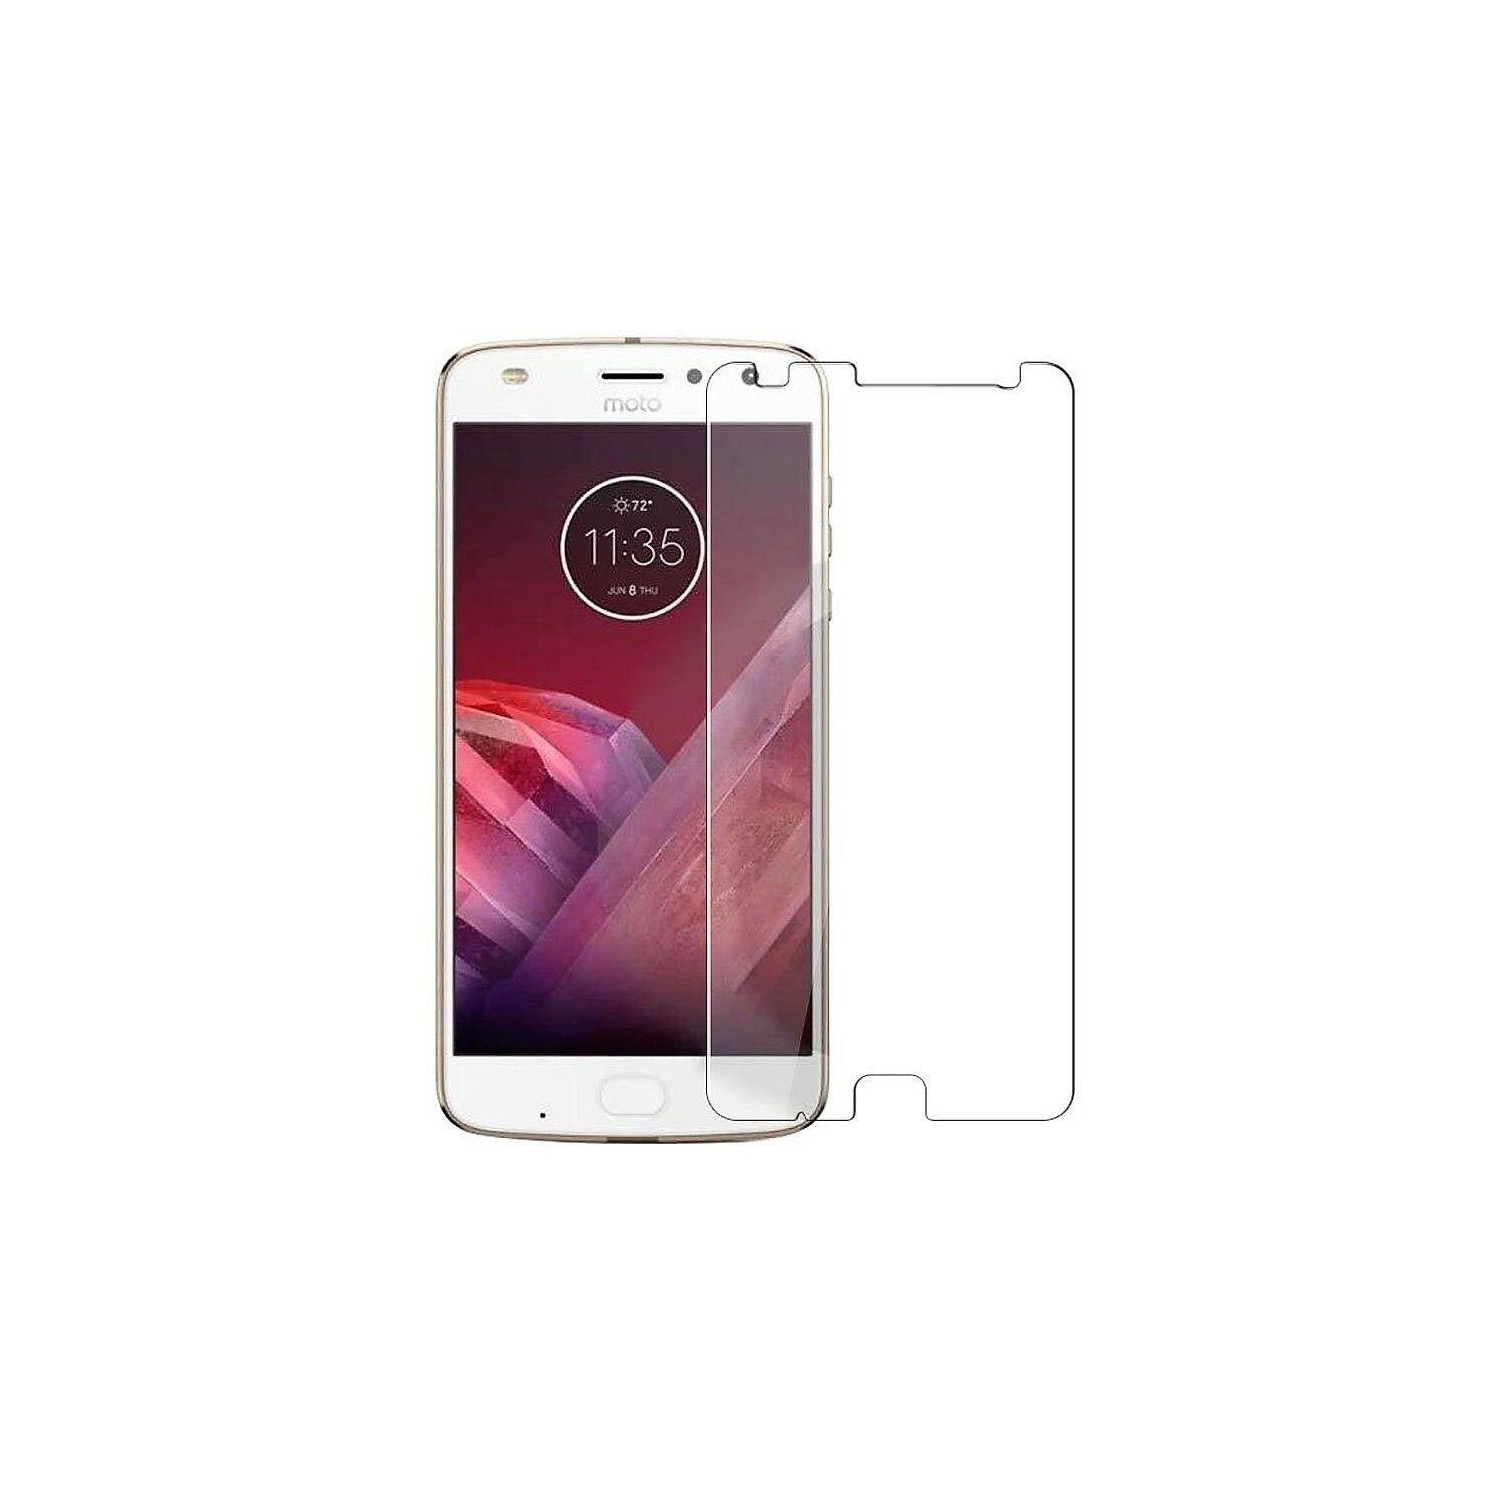 Tempered Glass Screen Protector Cover for Motorola Moto Z Z2 Play (2 PACK)